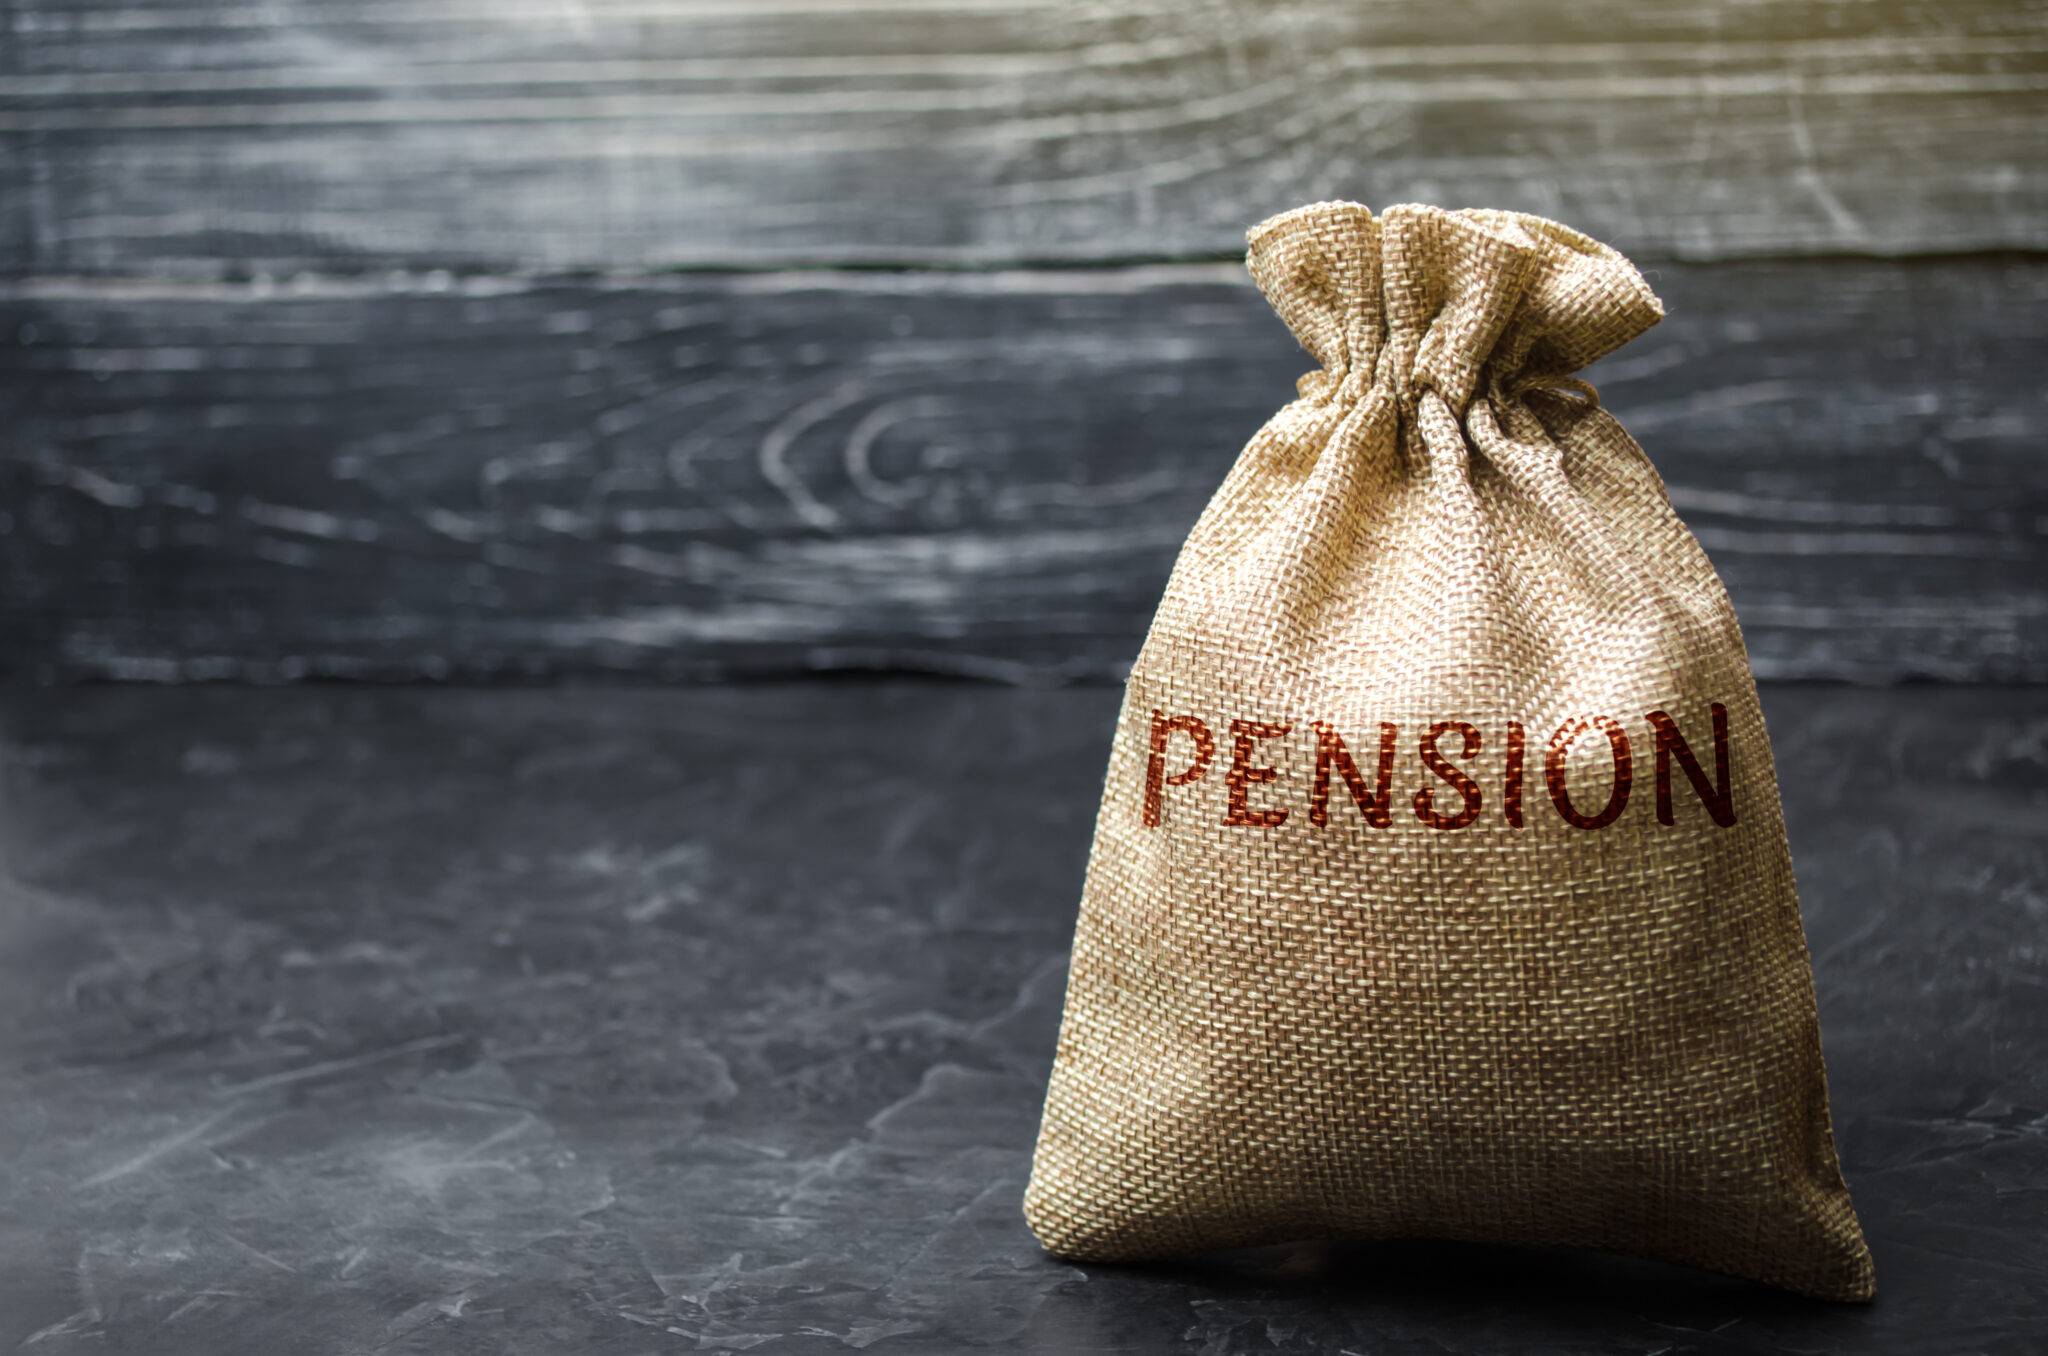 Claiming Tax Relief On Pension Contributions For Previous Years Letter Template